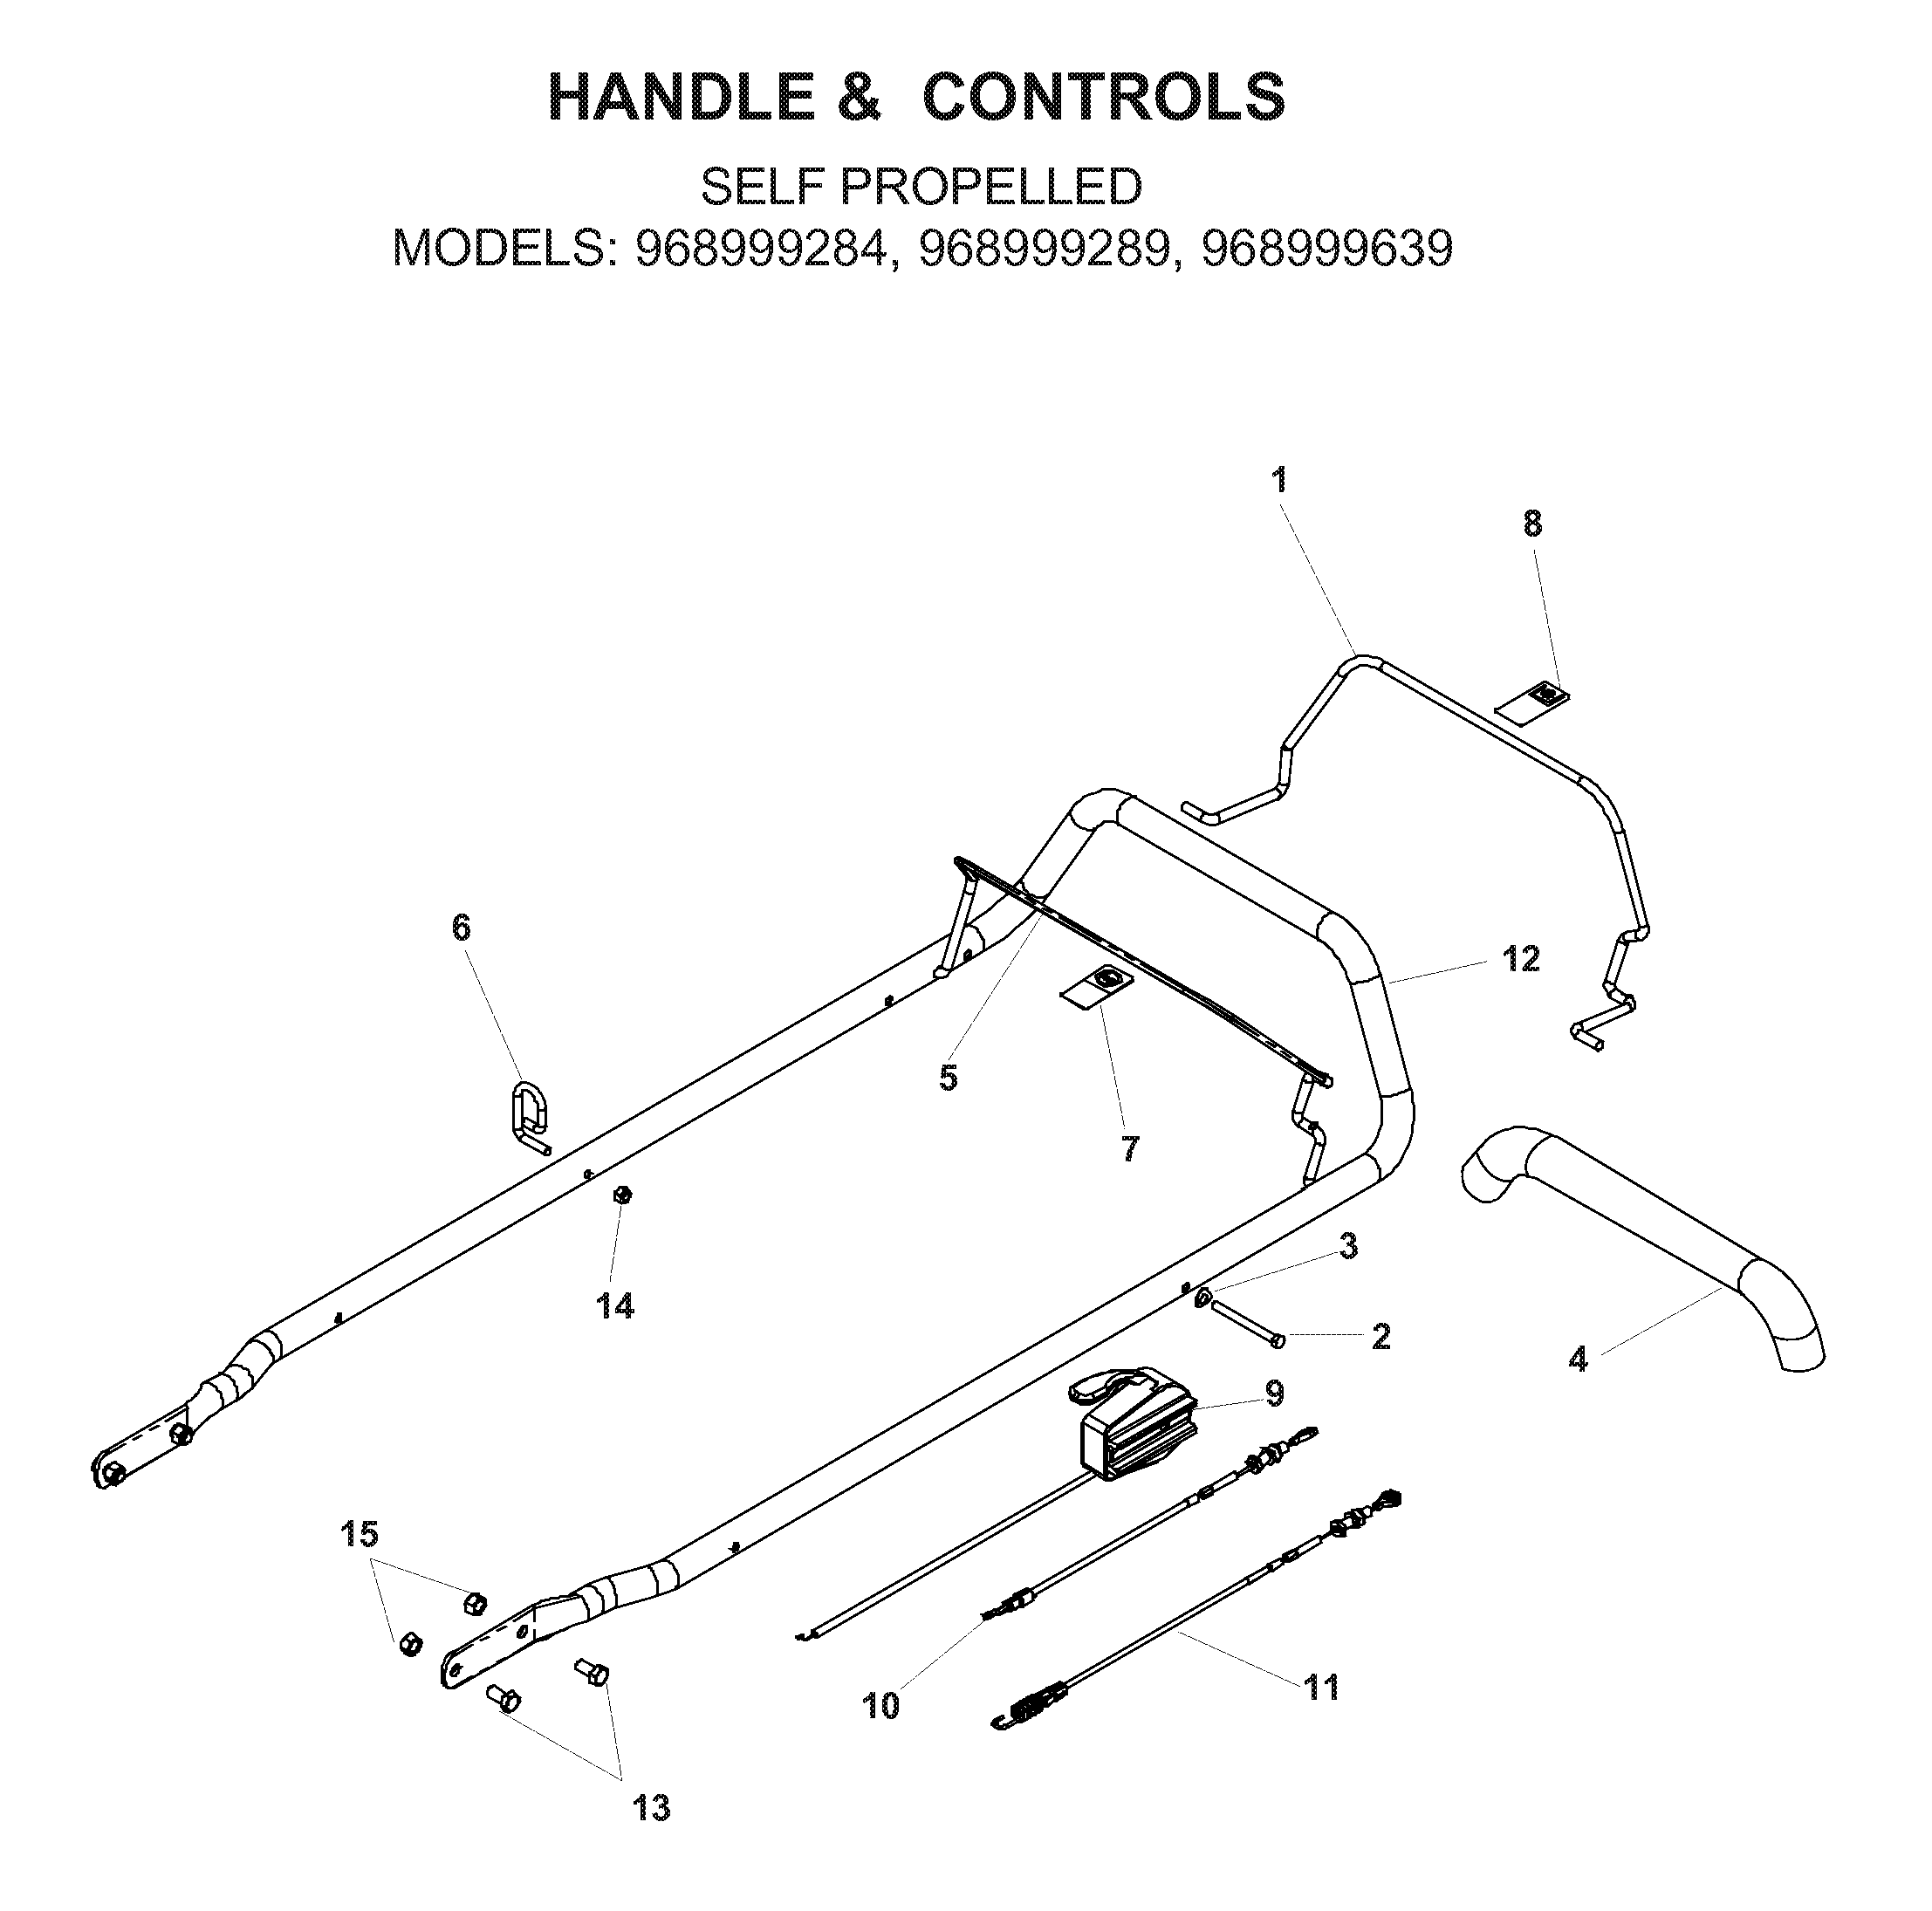 Handle and levers 539111993, 539112276, 539110488, 539130894, 539112908, 539112922, 539113067, 539113068, 539113108, 539113109, 506109701, 539113117, 539990134, 539976978, 596240901, 539976856